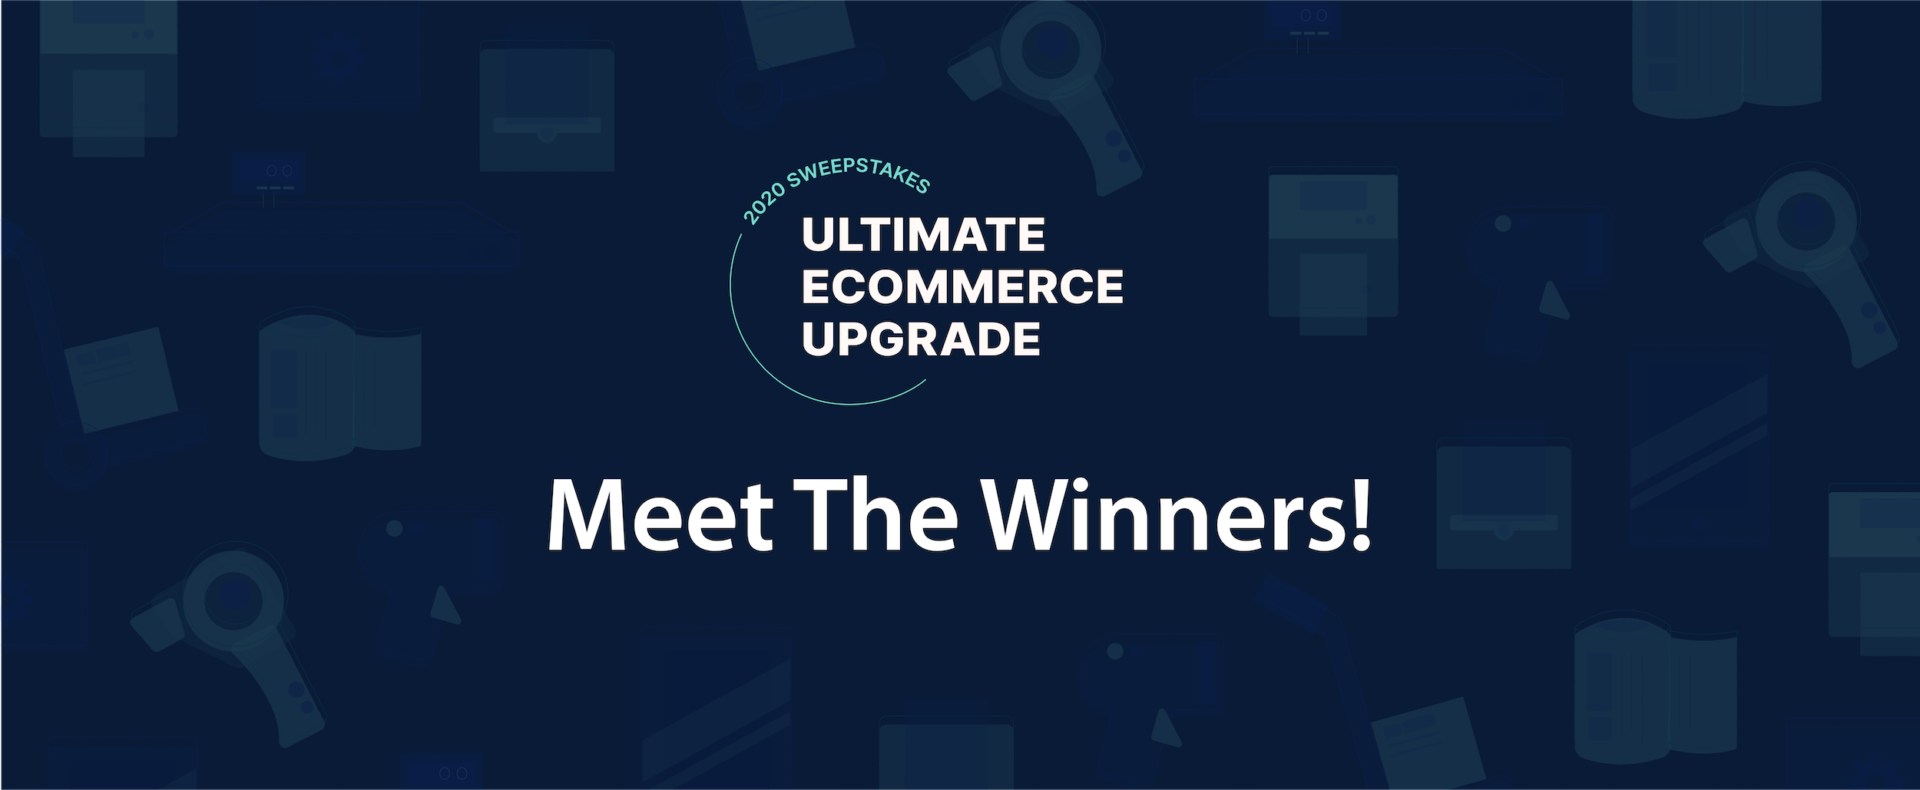 Meet the winners of the 2020 Ultimate Ecommerce Upgrade